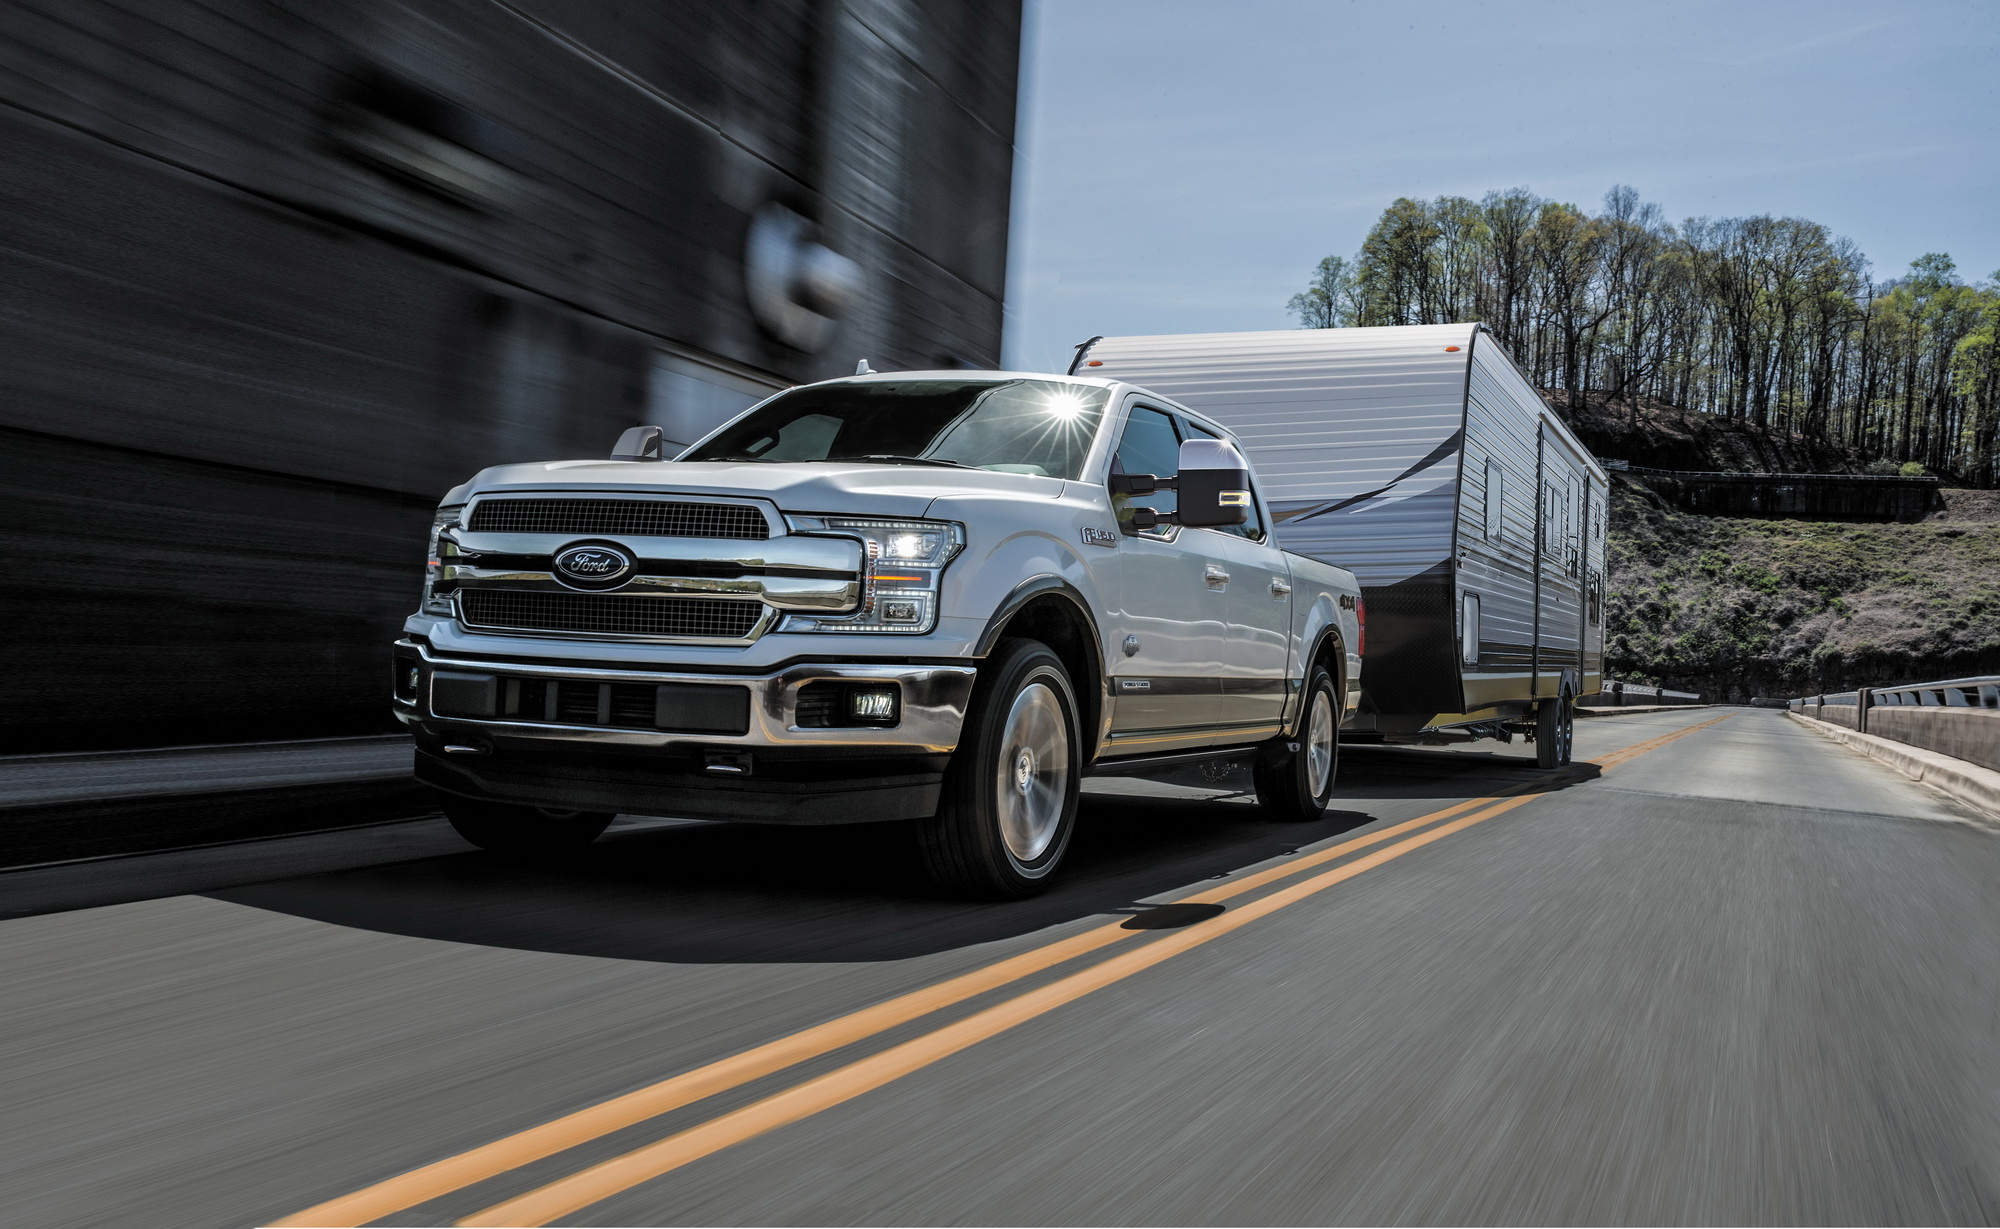 Ford F-150 towing capacity